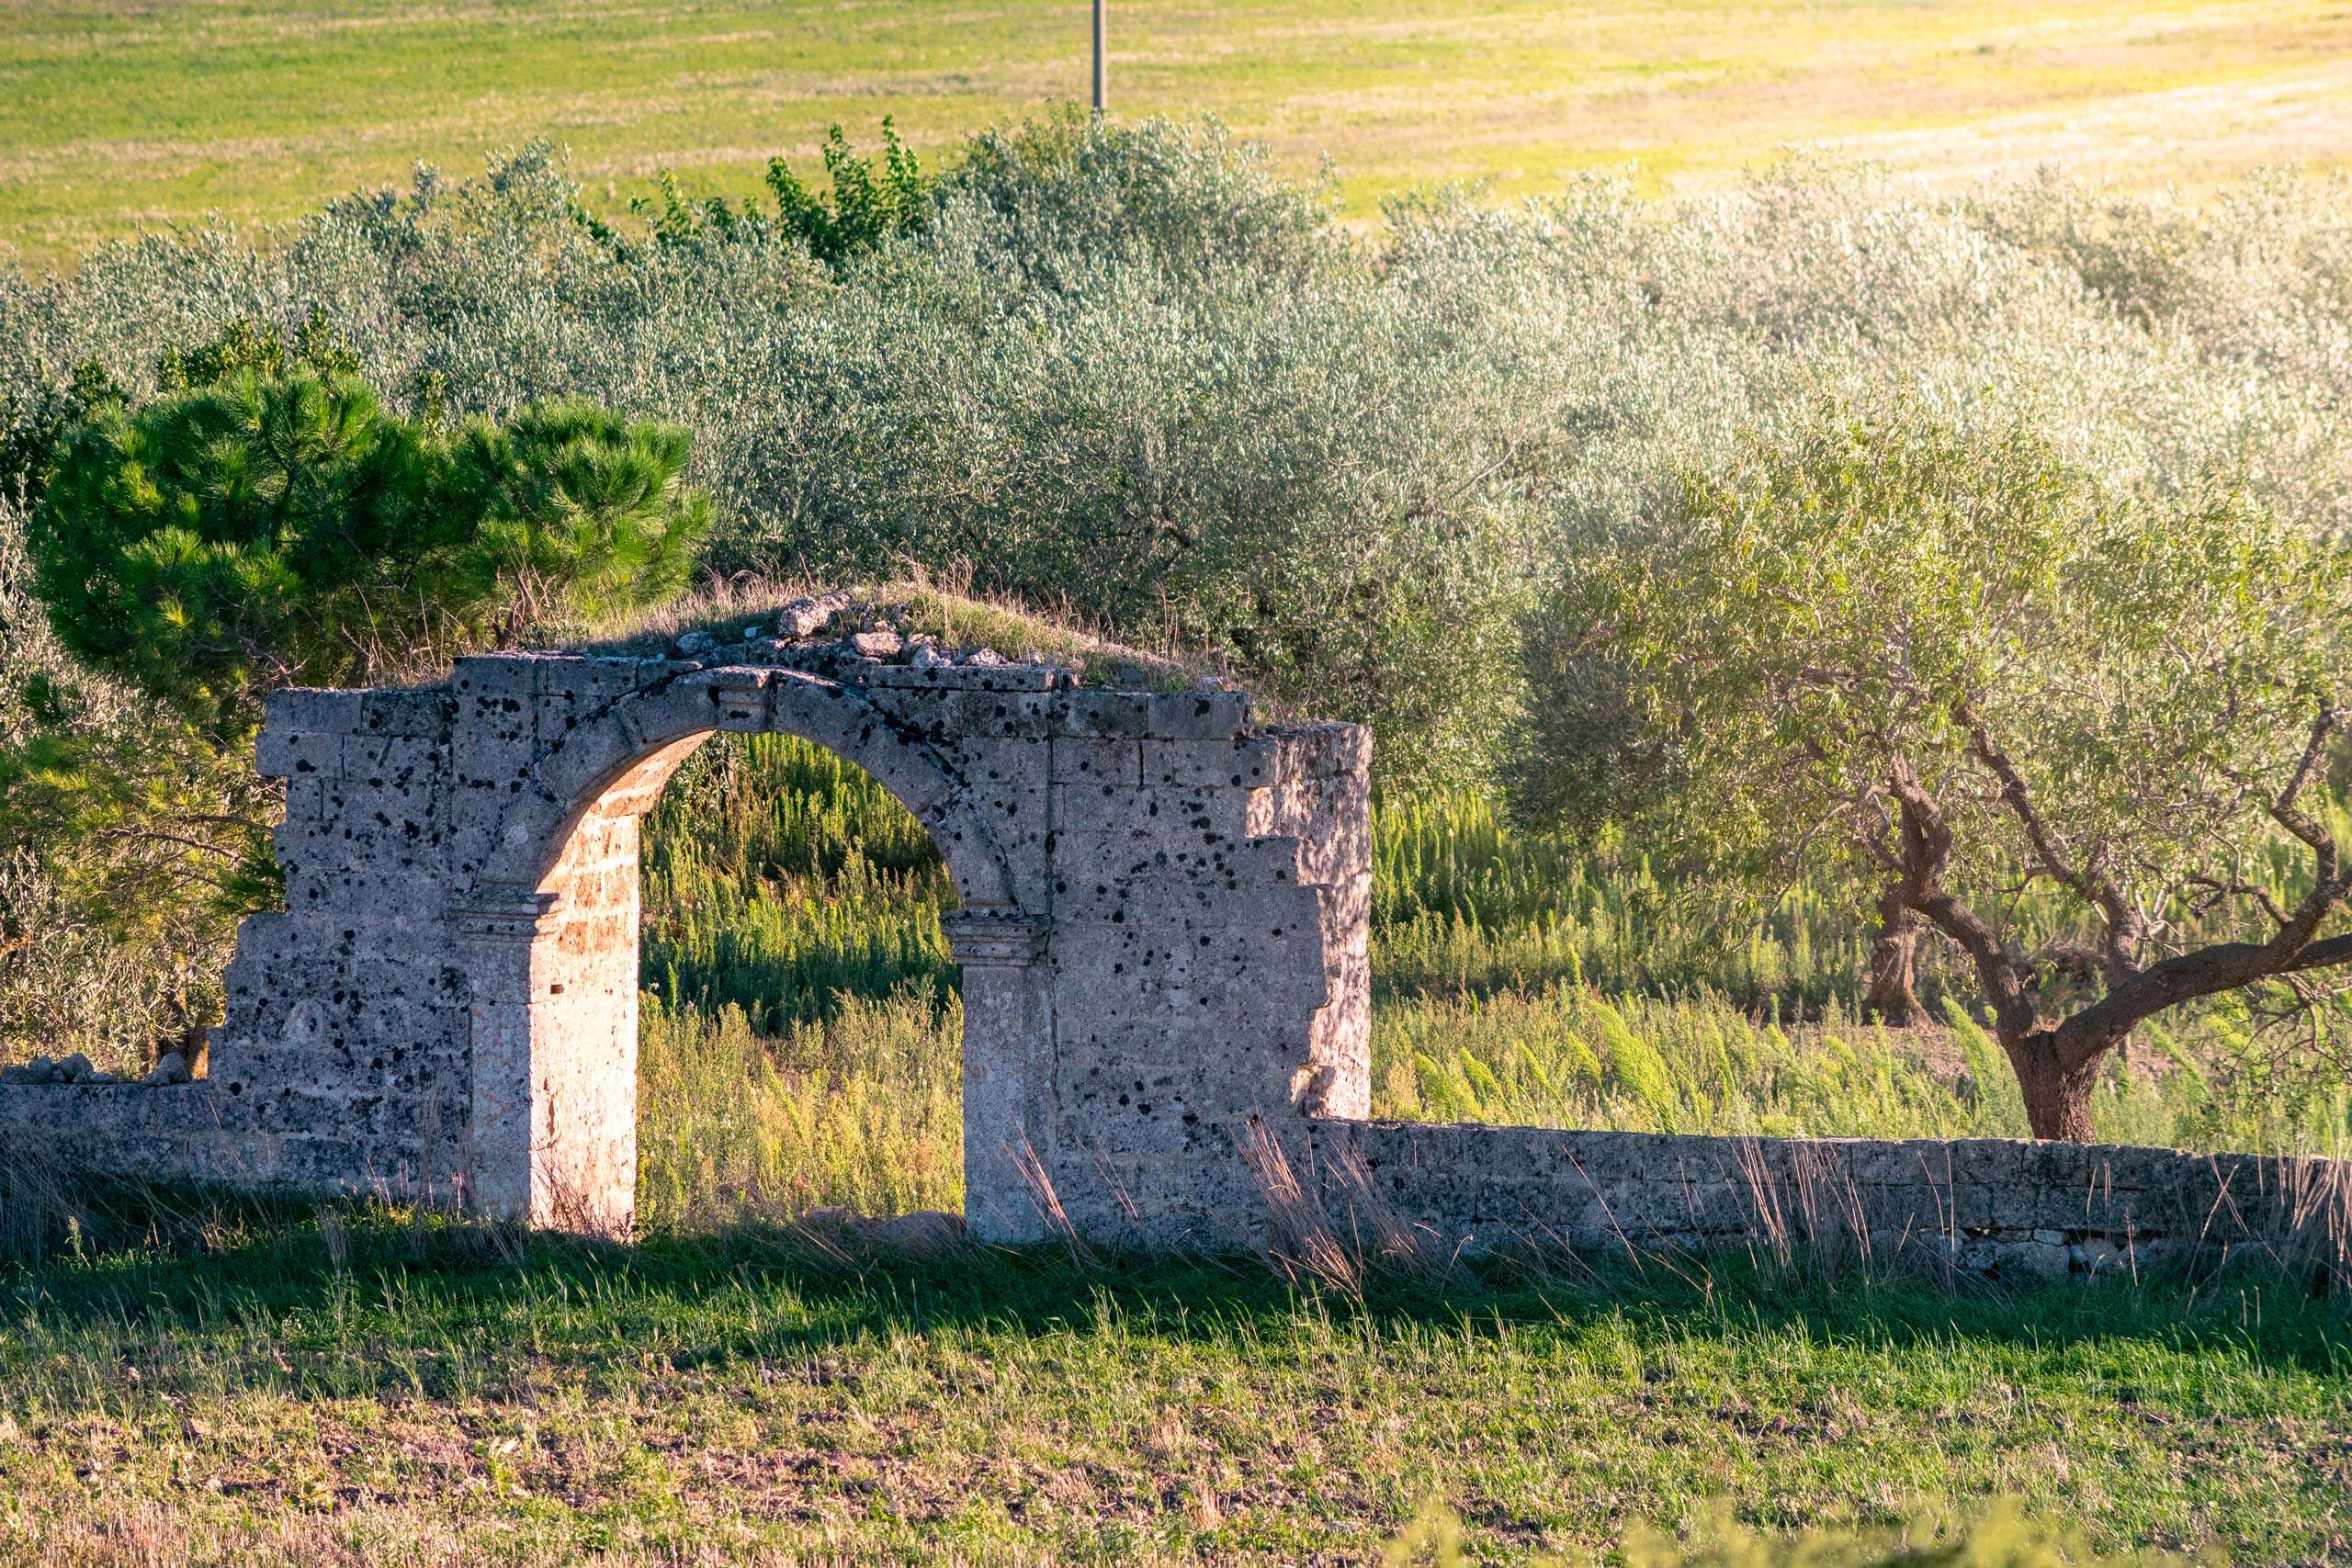 Detail of a Jazzo at National Park of Alta Murgia in Puglia